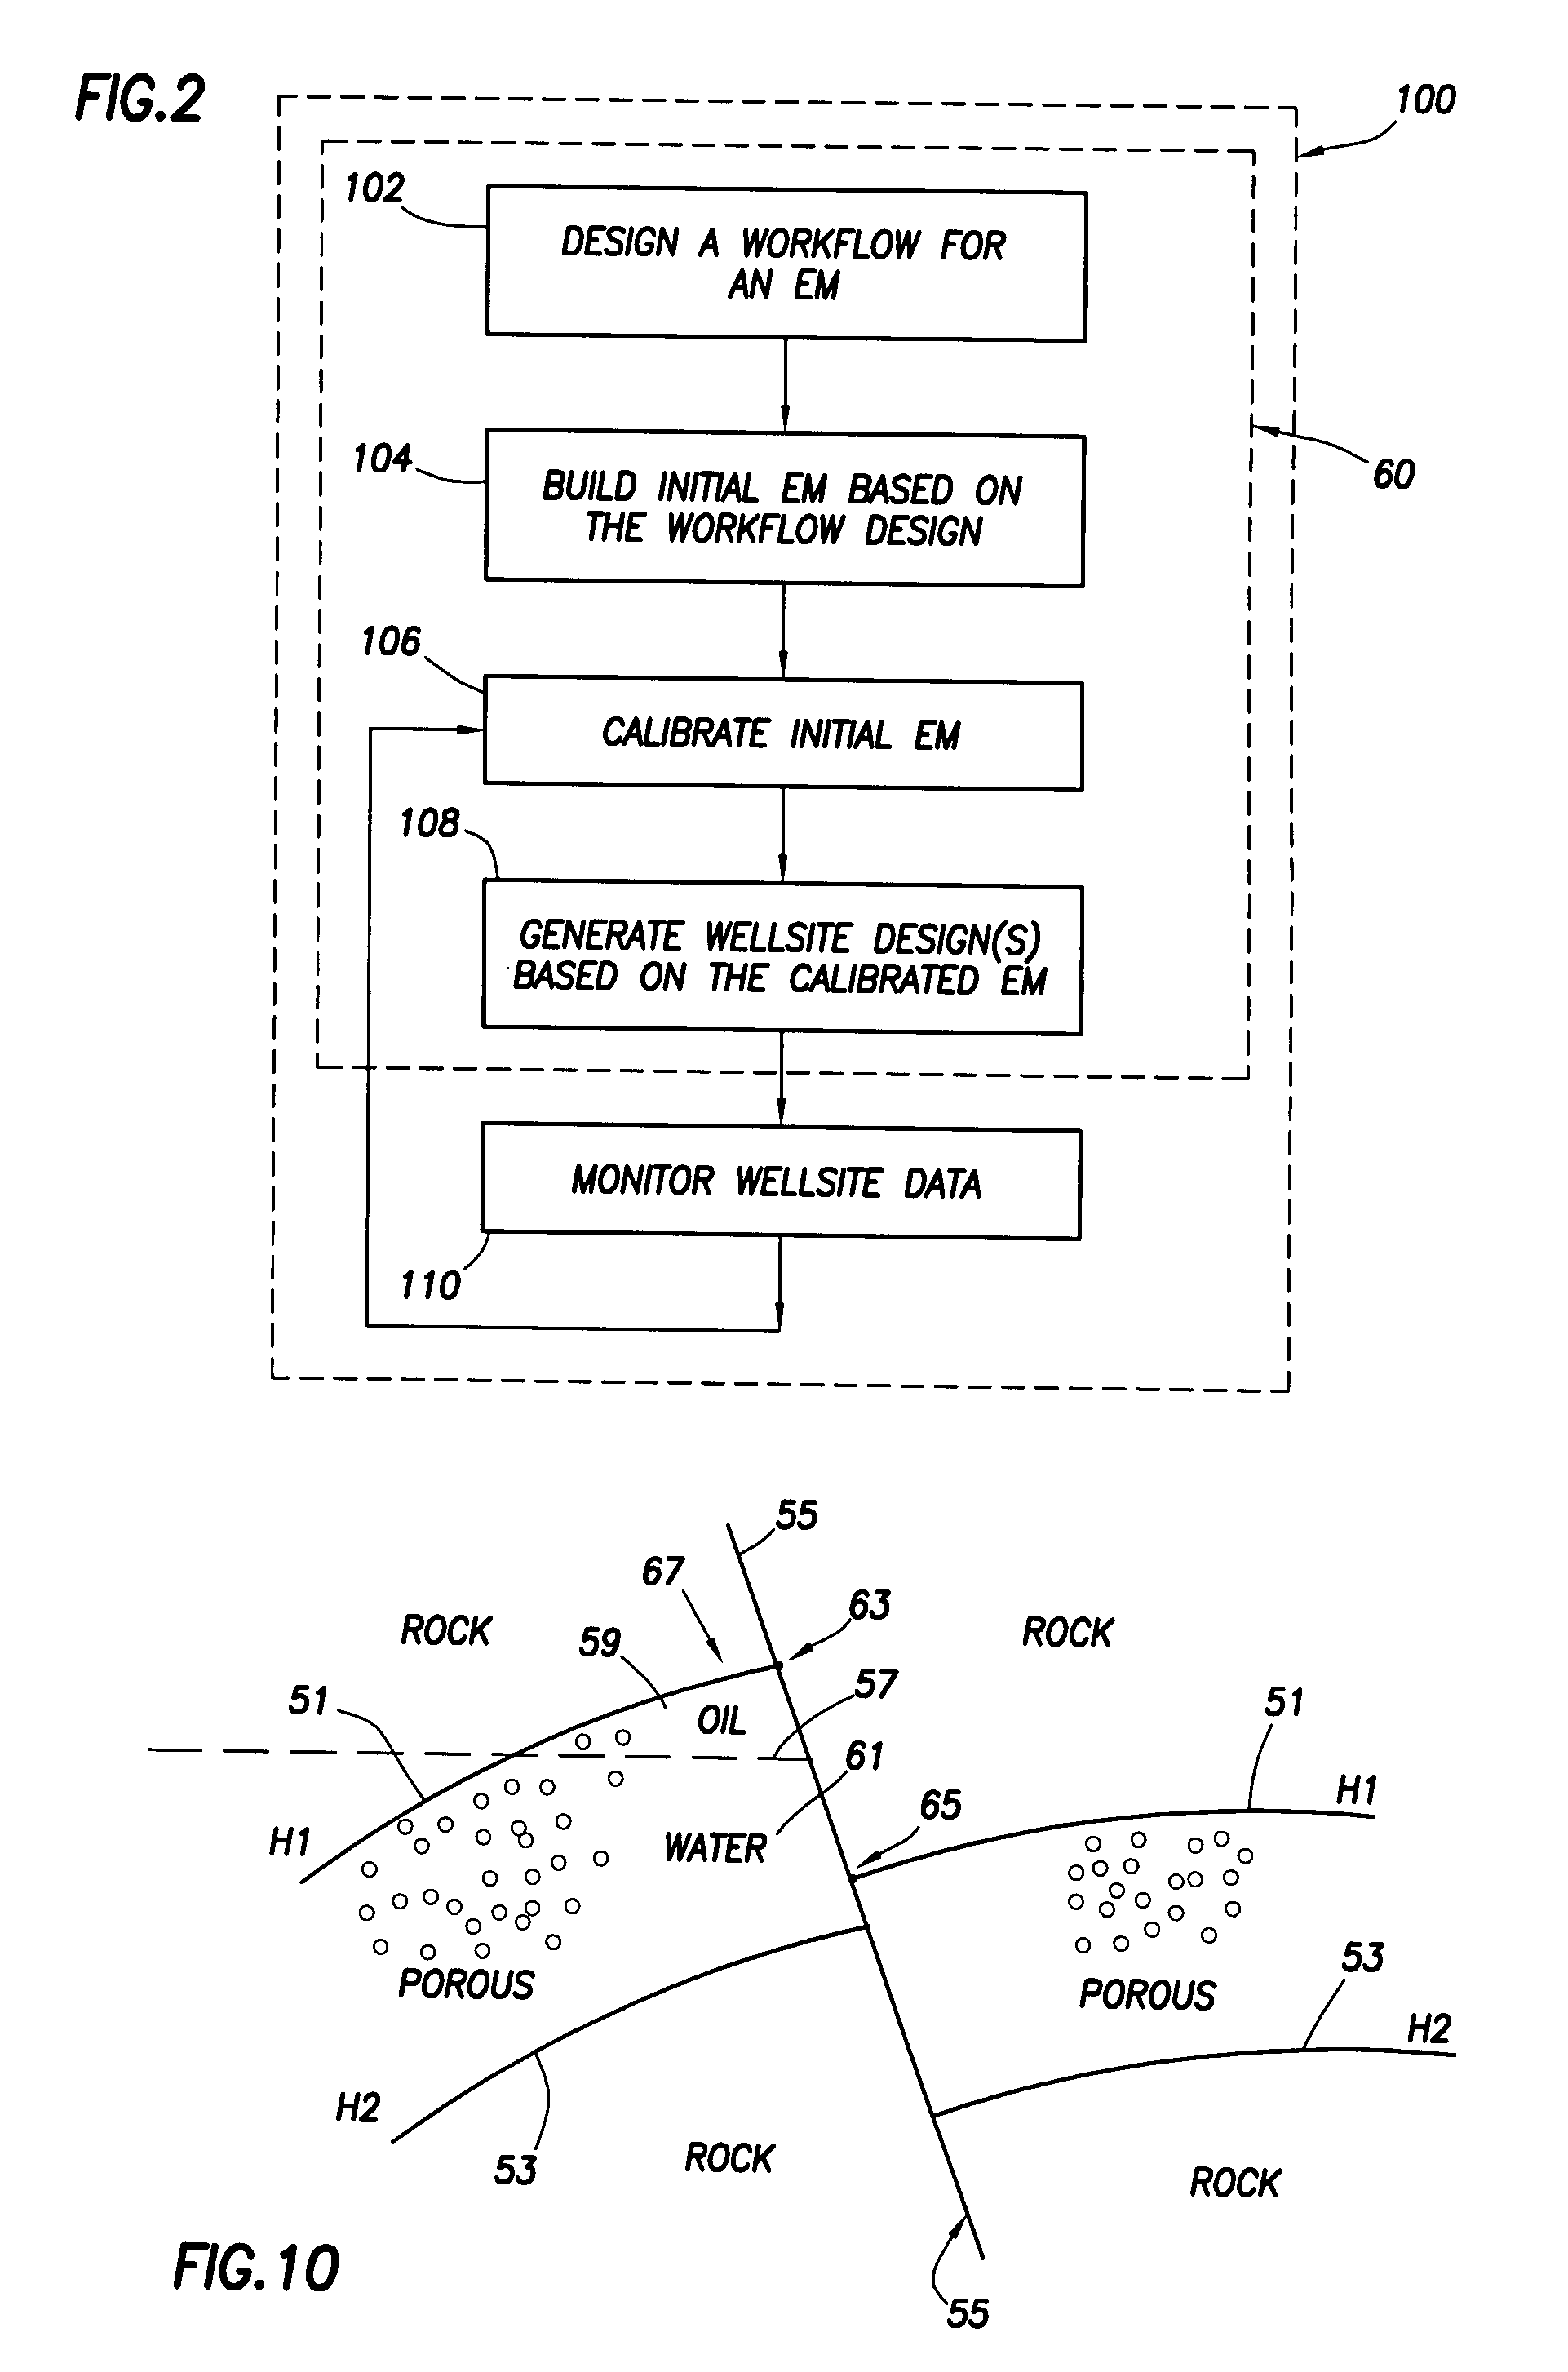 Method for designing and optimizing drilling and completion operations in hydrocarbon reservoirs